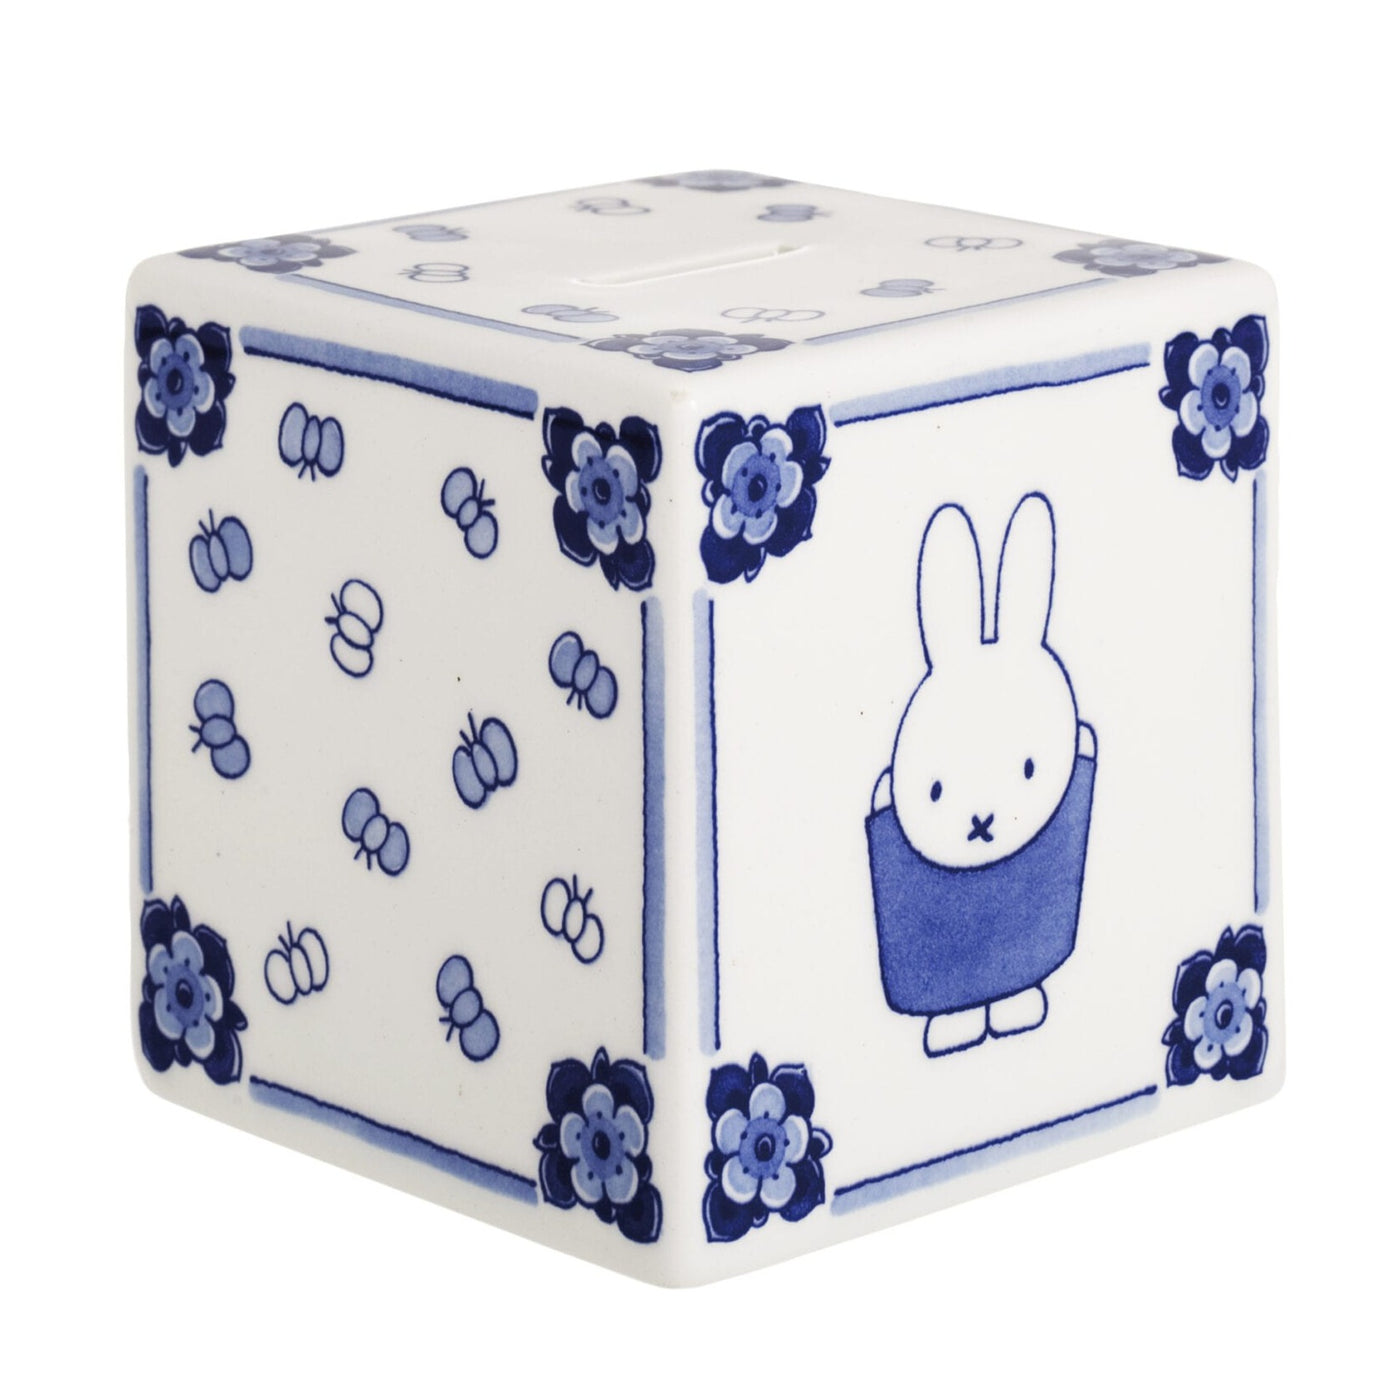 Miffy Piggy Bank Cube Delft Blue by Royal Delft